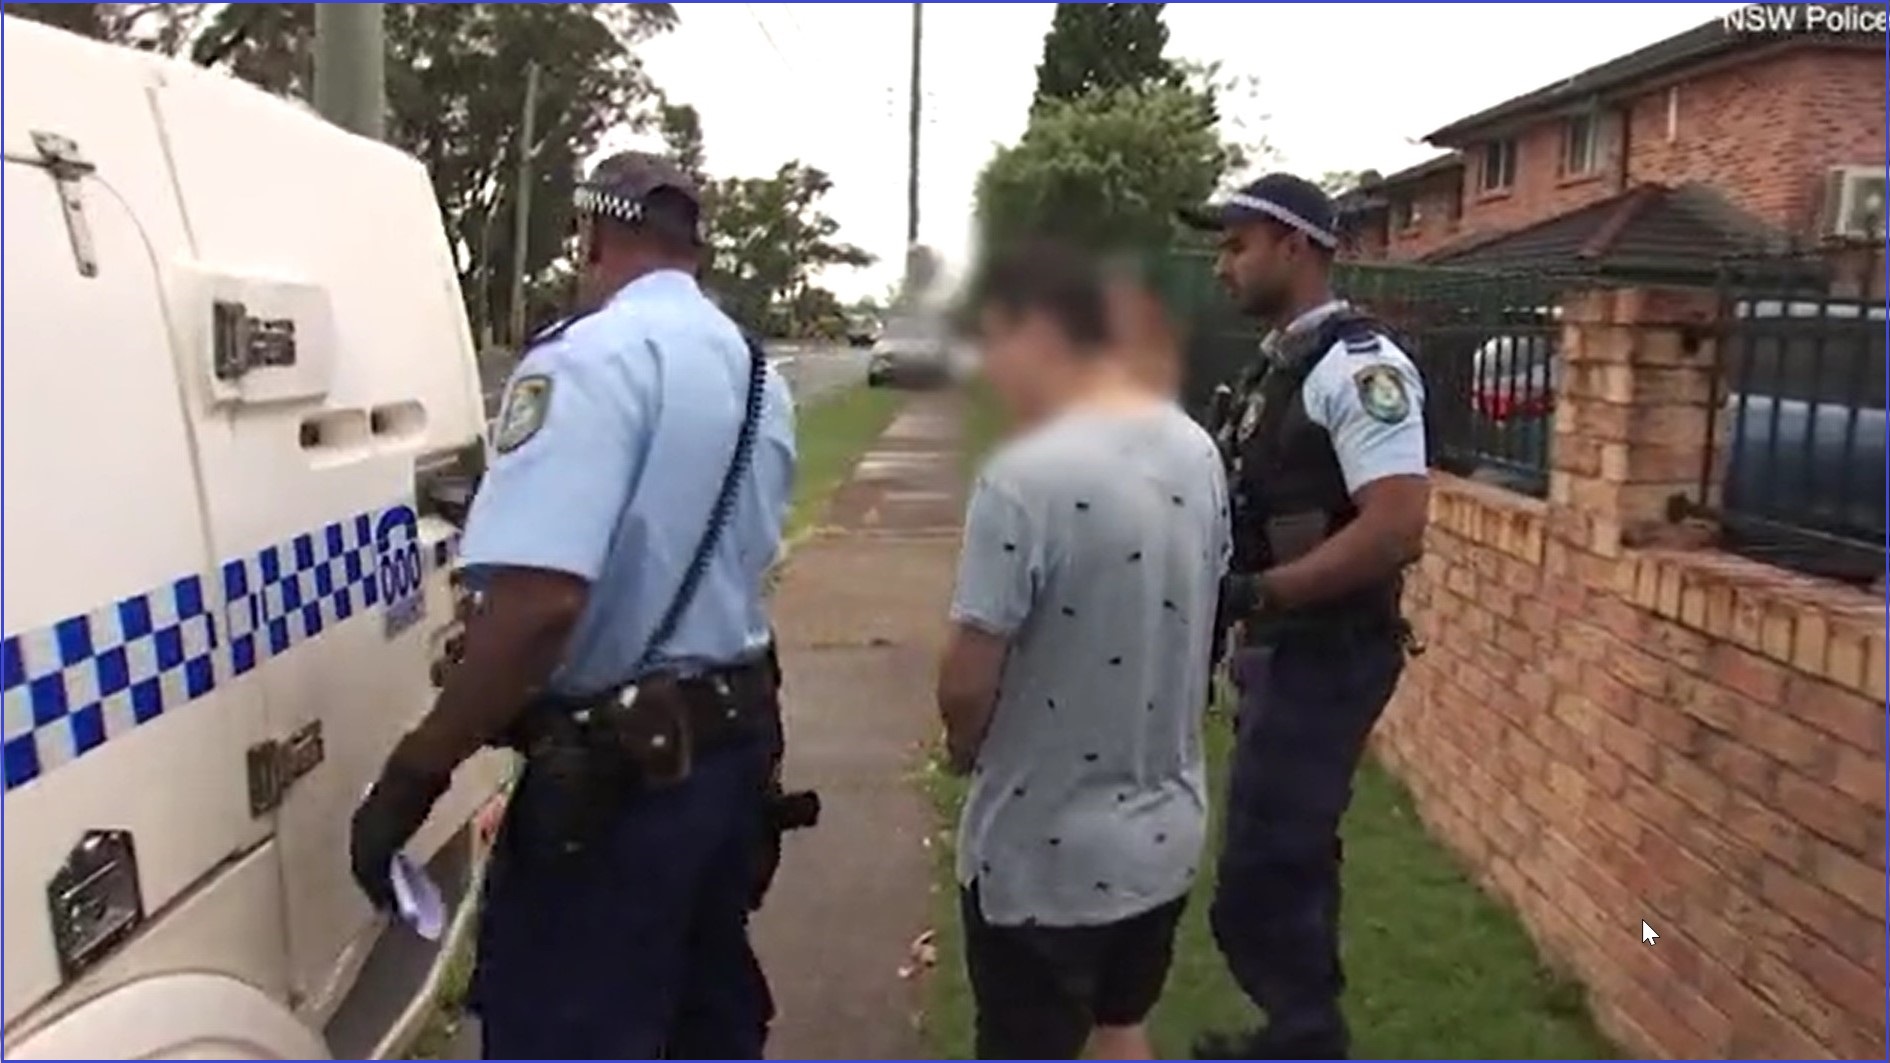 Xuan Su being arrested by NSW Police